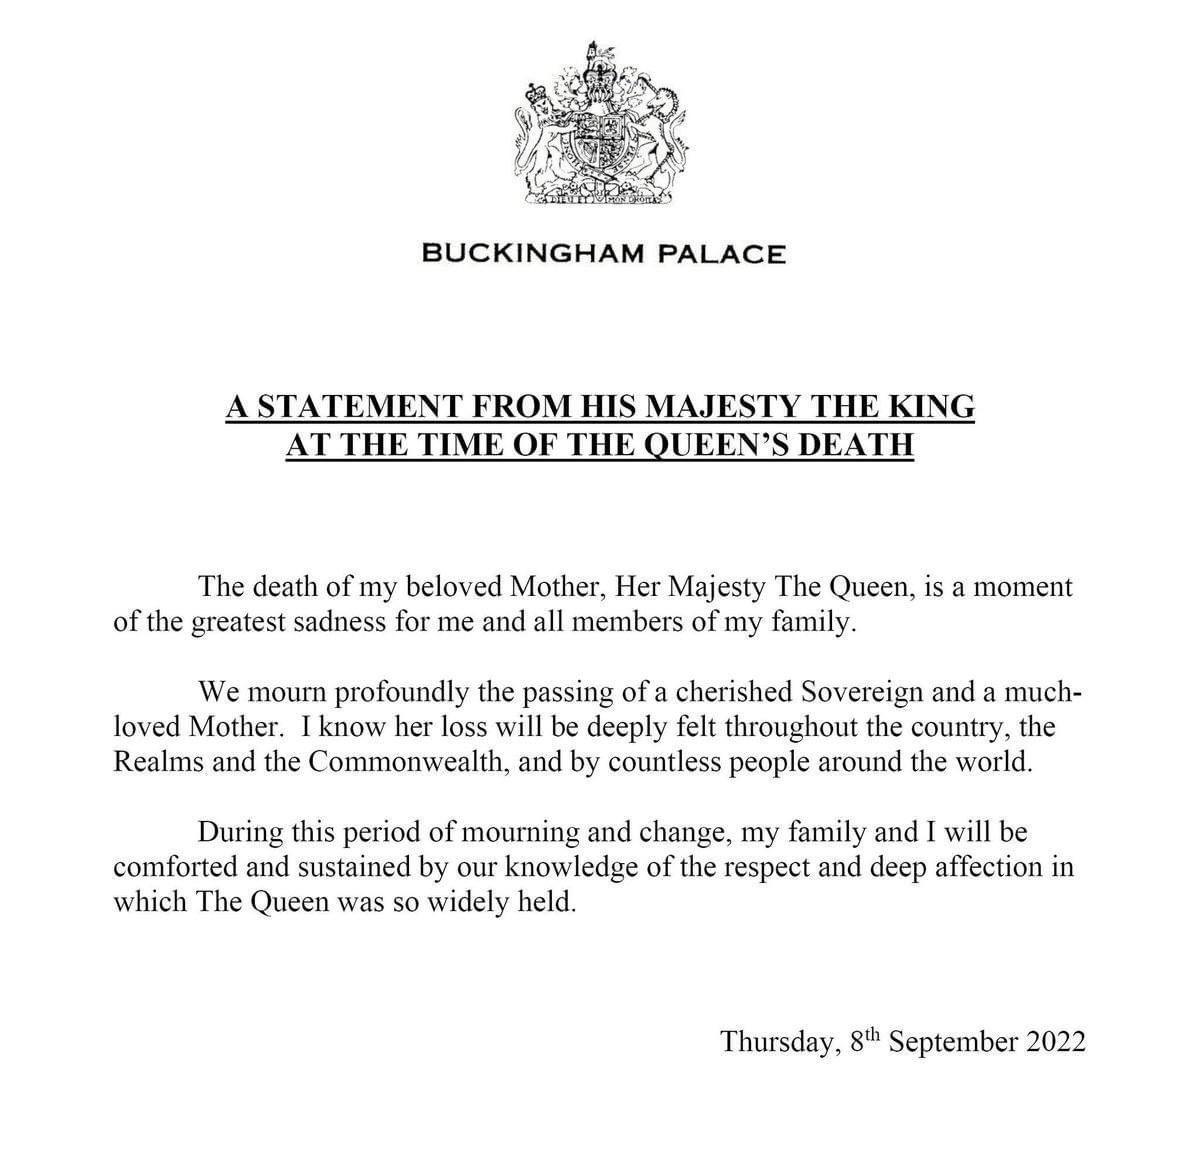 A STATEMENT FROM HIS MAJESTY THE KING AT THE TIME OF THE QUEEN'S DEATH